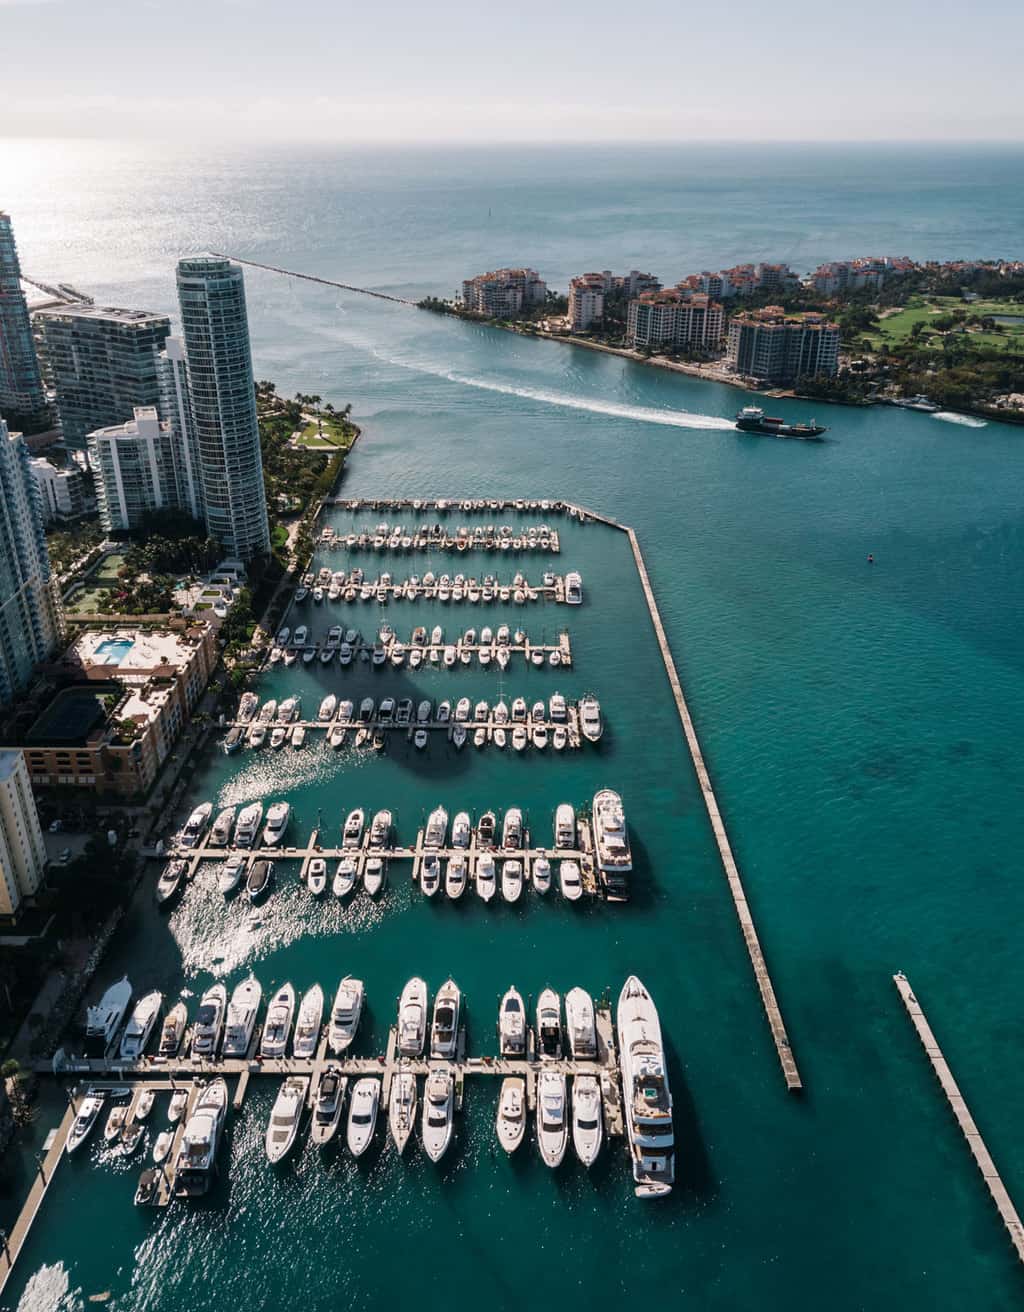 Aerial view of boats moored in fron of high rise buildings in Miami. 